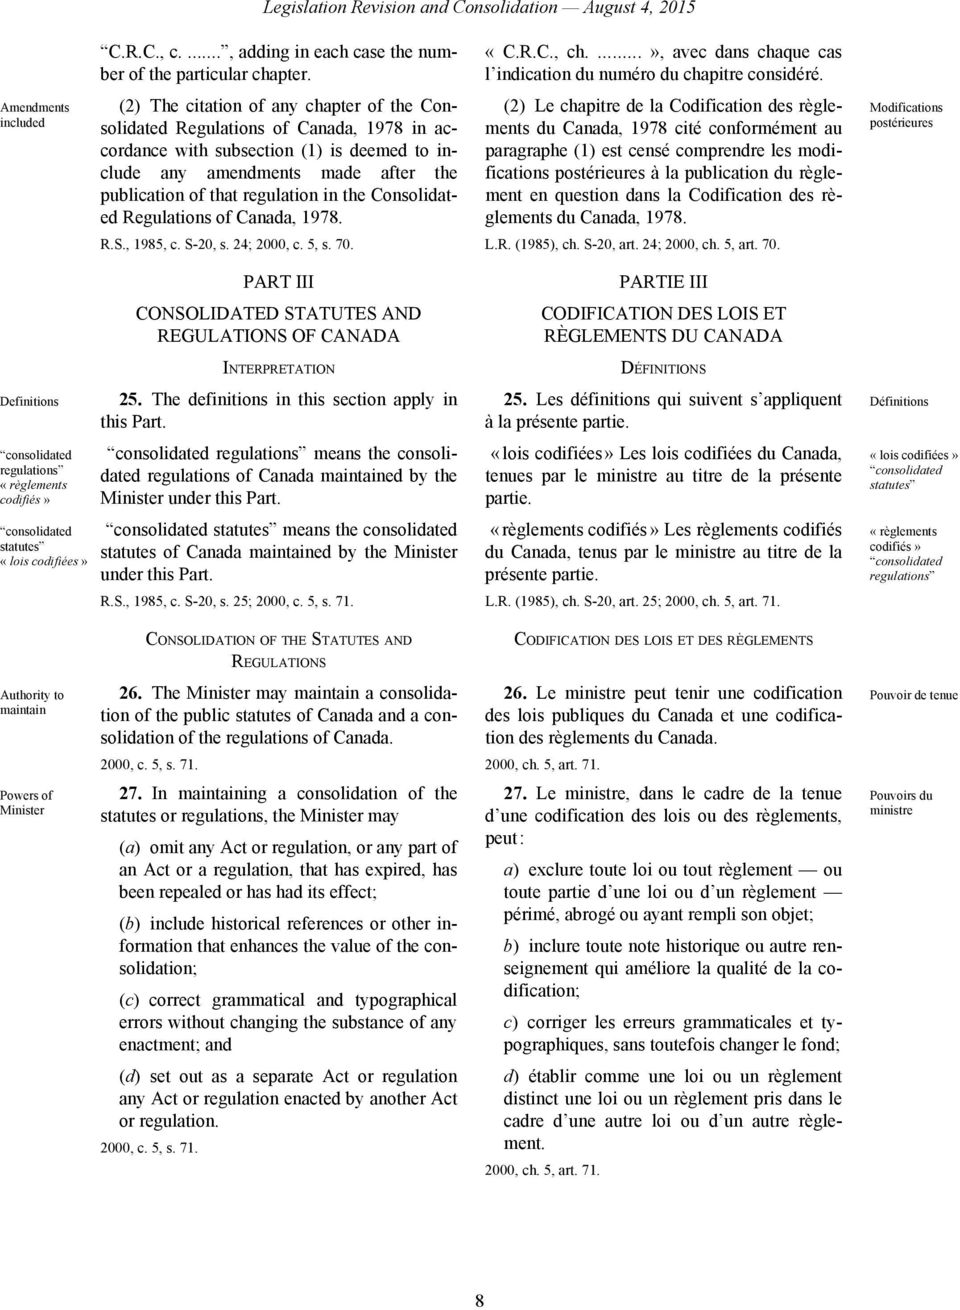 Amendments included (2) The citation of any chapter of the Consolidated Regulations of Canada, 1978 in accordance with subsection (1) is deemed to include any amendments made after the publication of